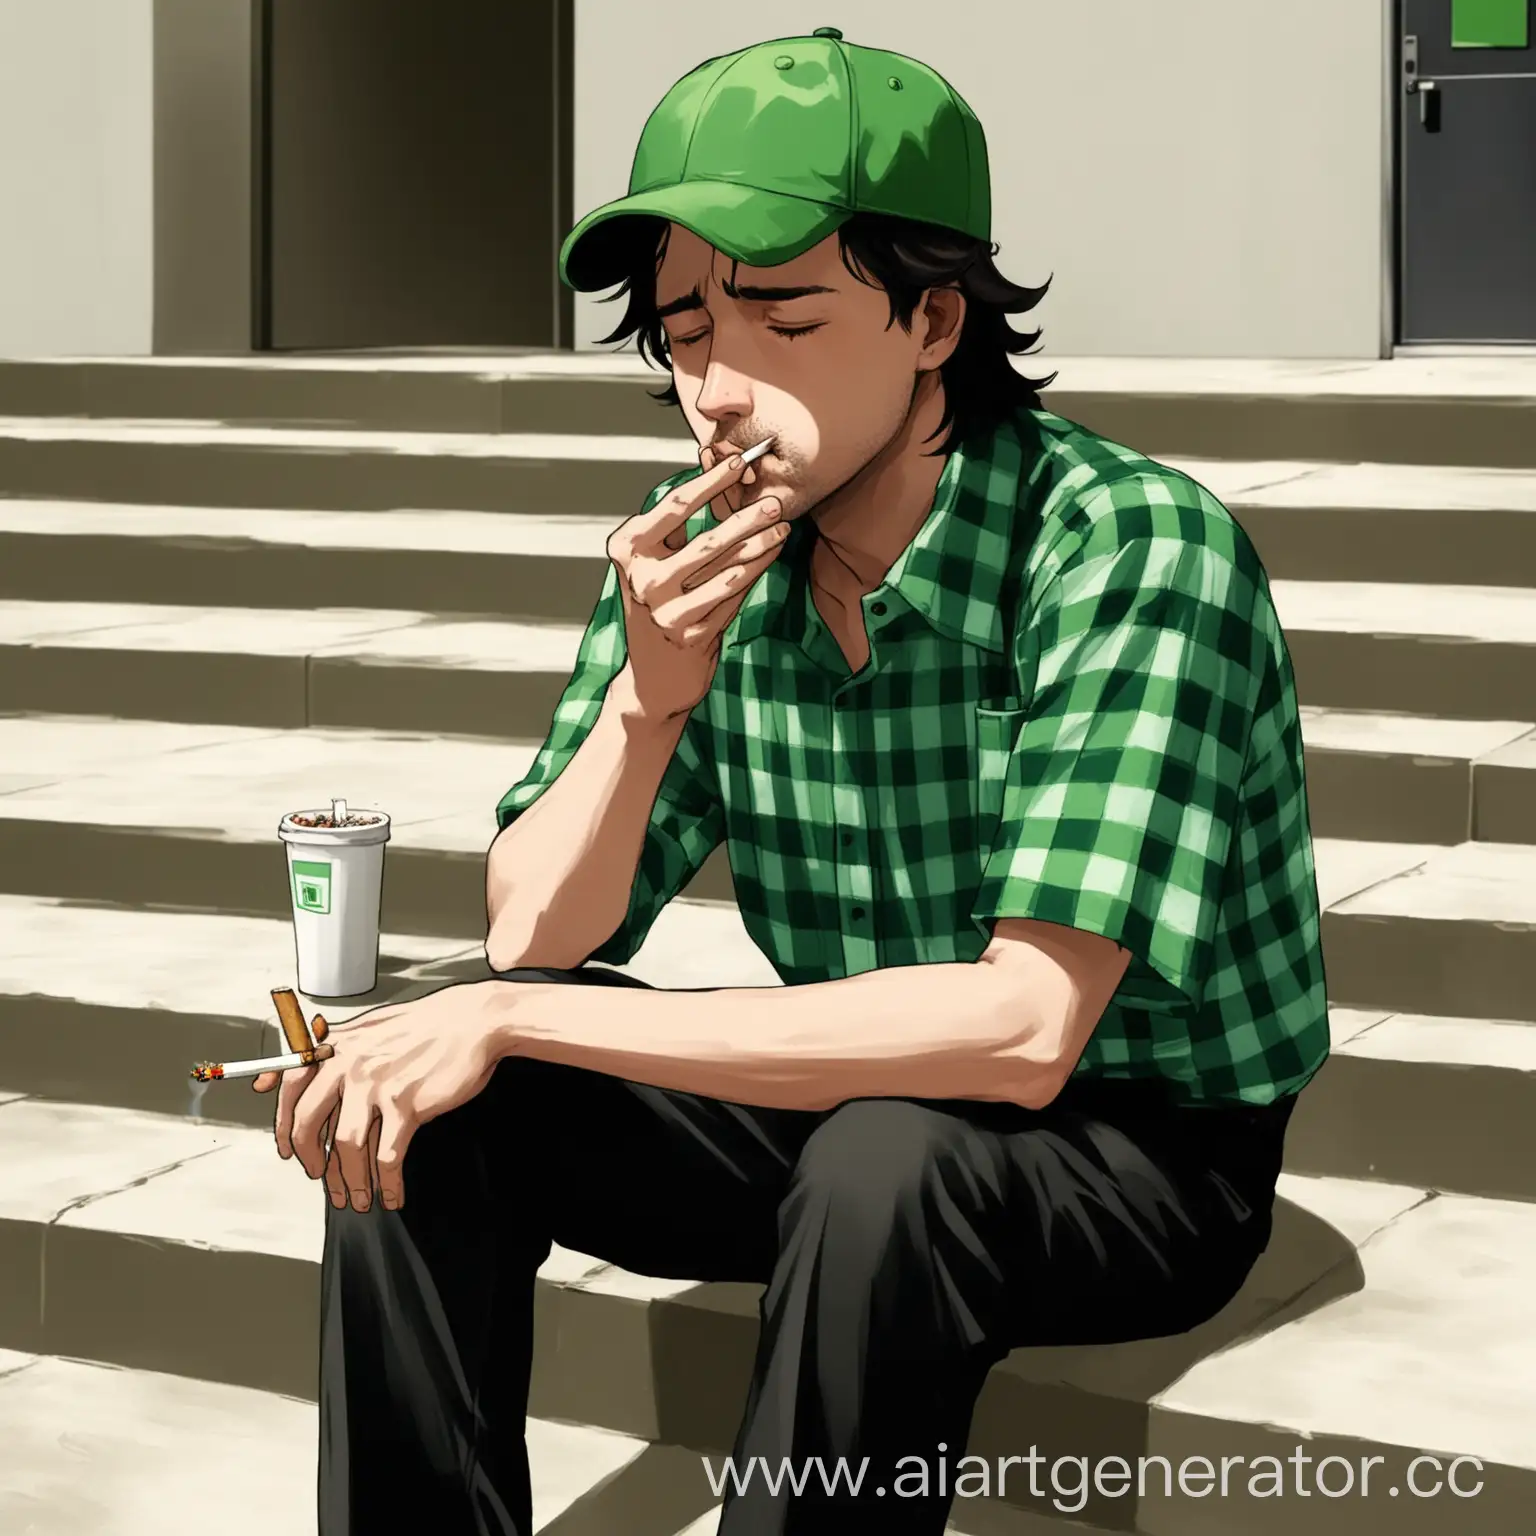 Food-Service-Worker-Taking-a-Break-Resting-on-Steps-with-Cigarette